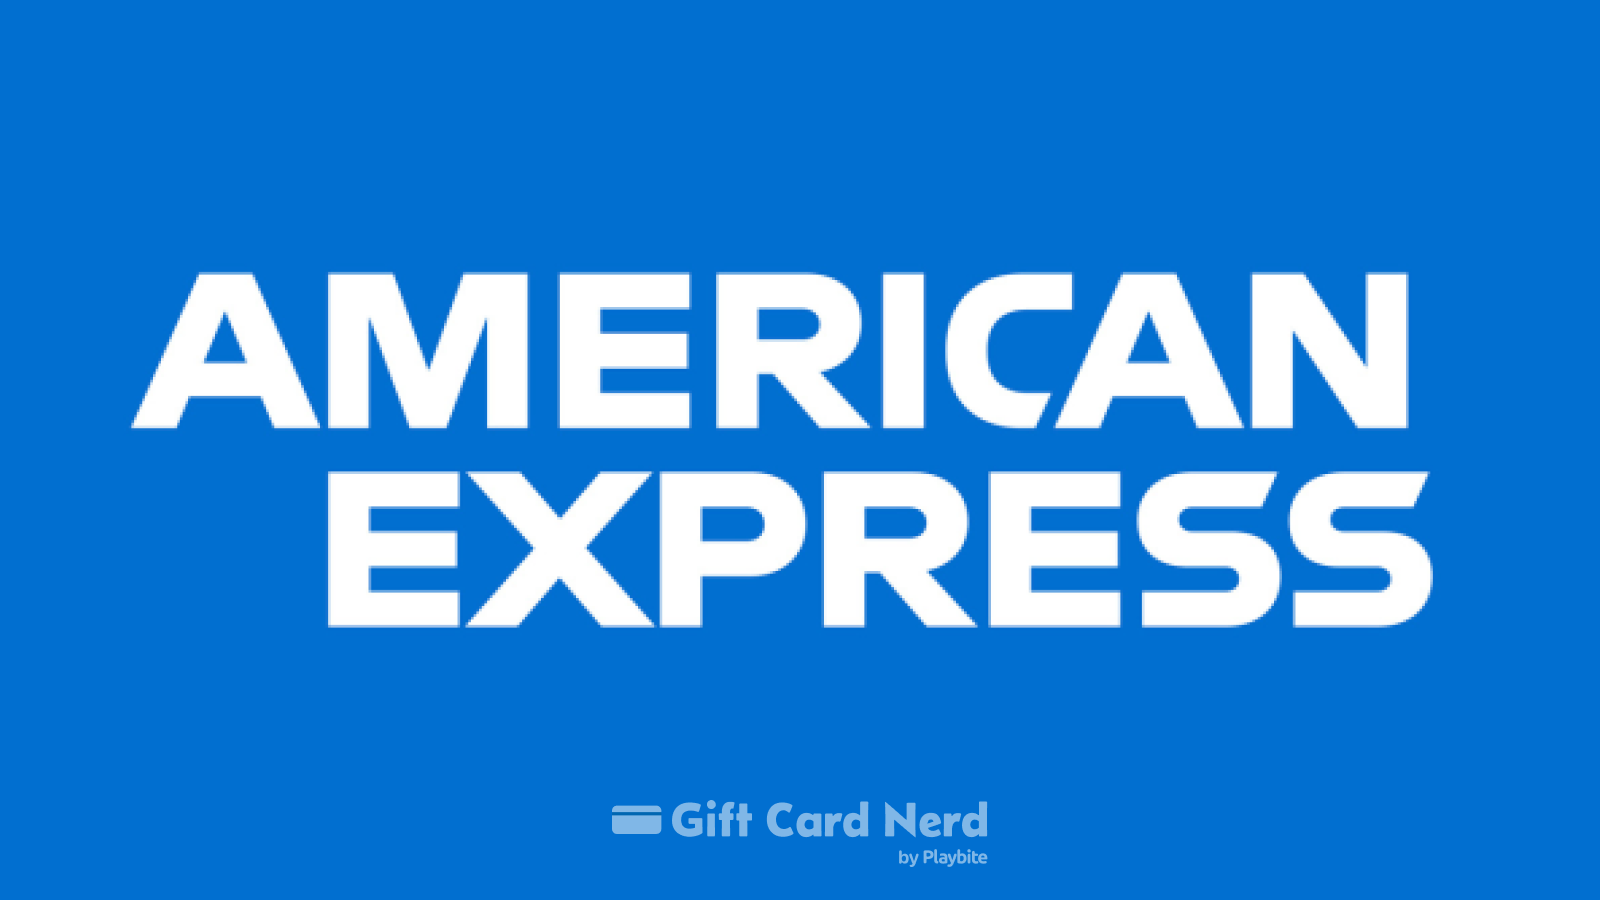 Does Target Sell Amex Gift Cards?